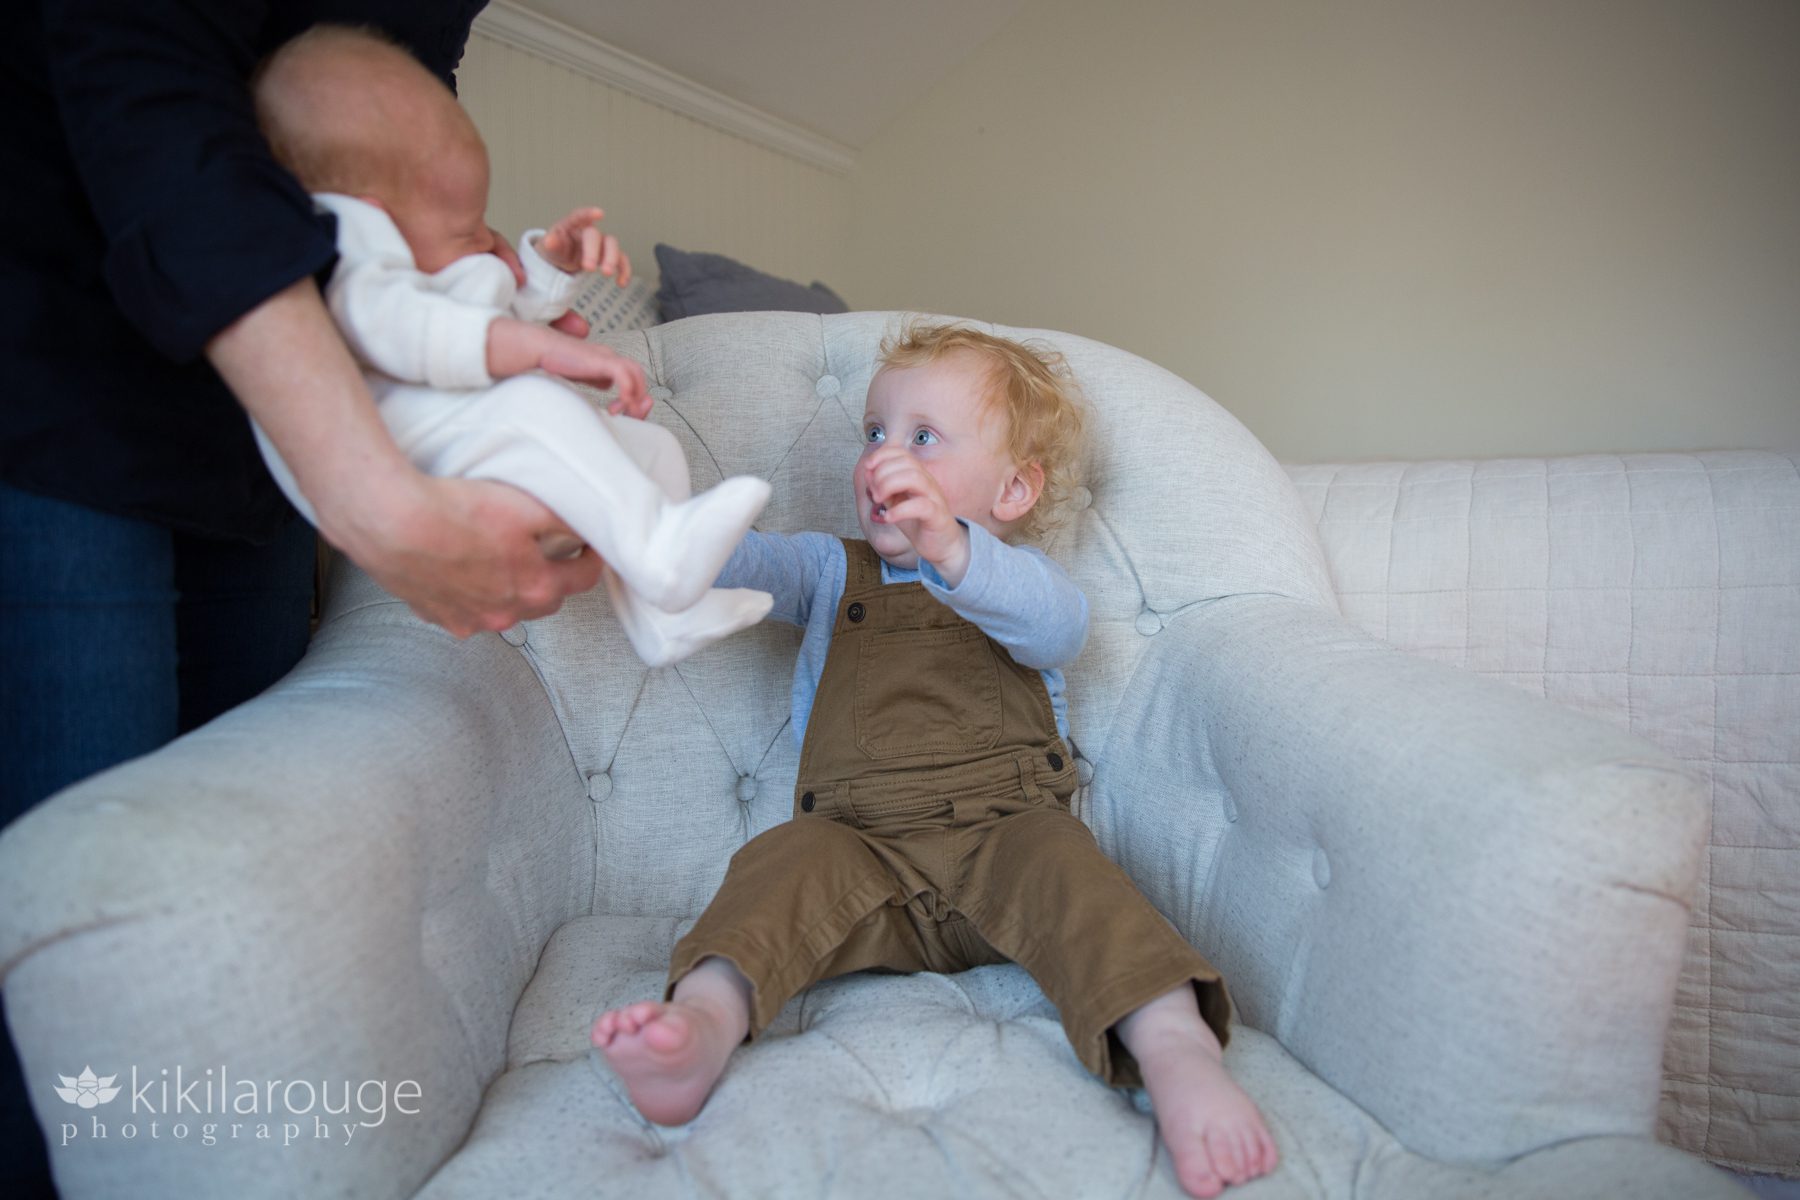 Toddler in brown overalls in chair reaching for his newborn baby sister